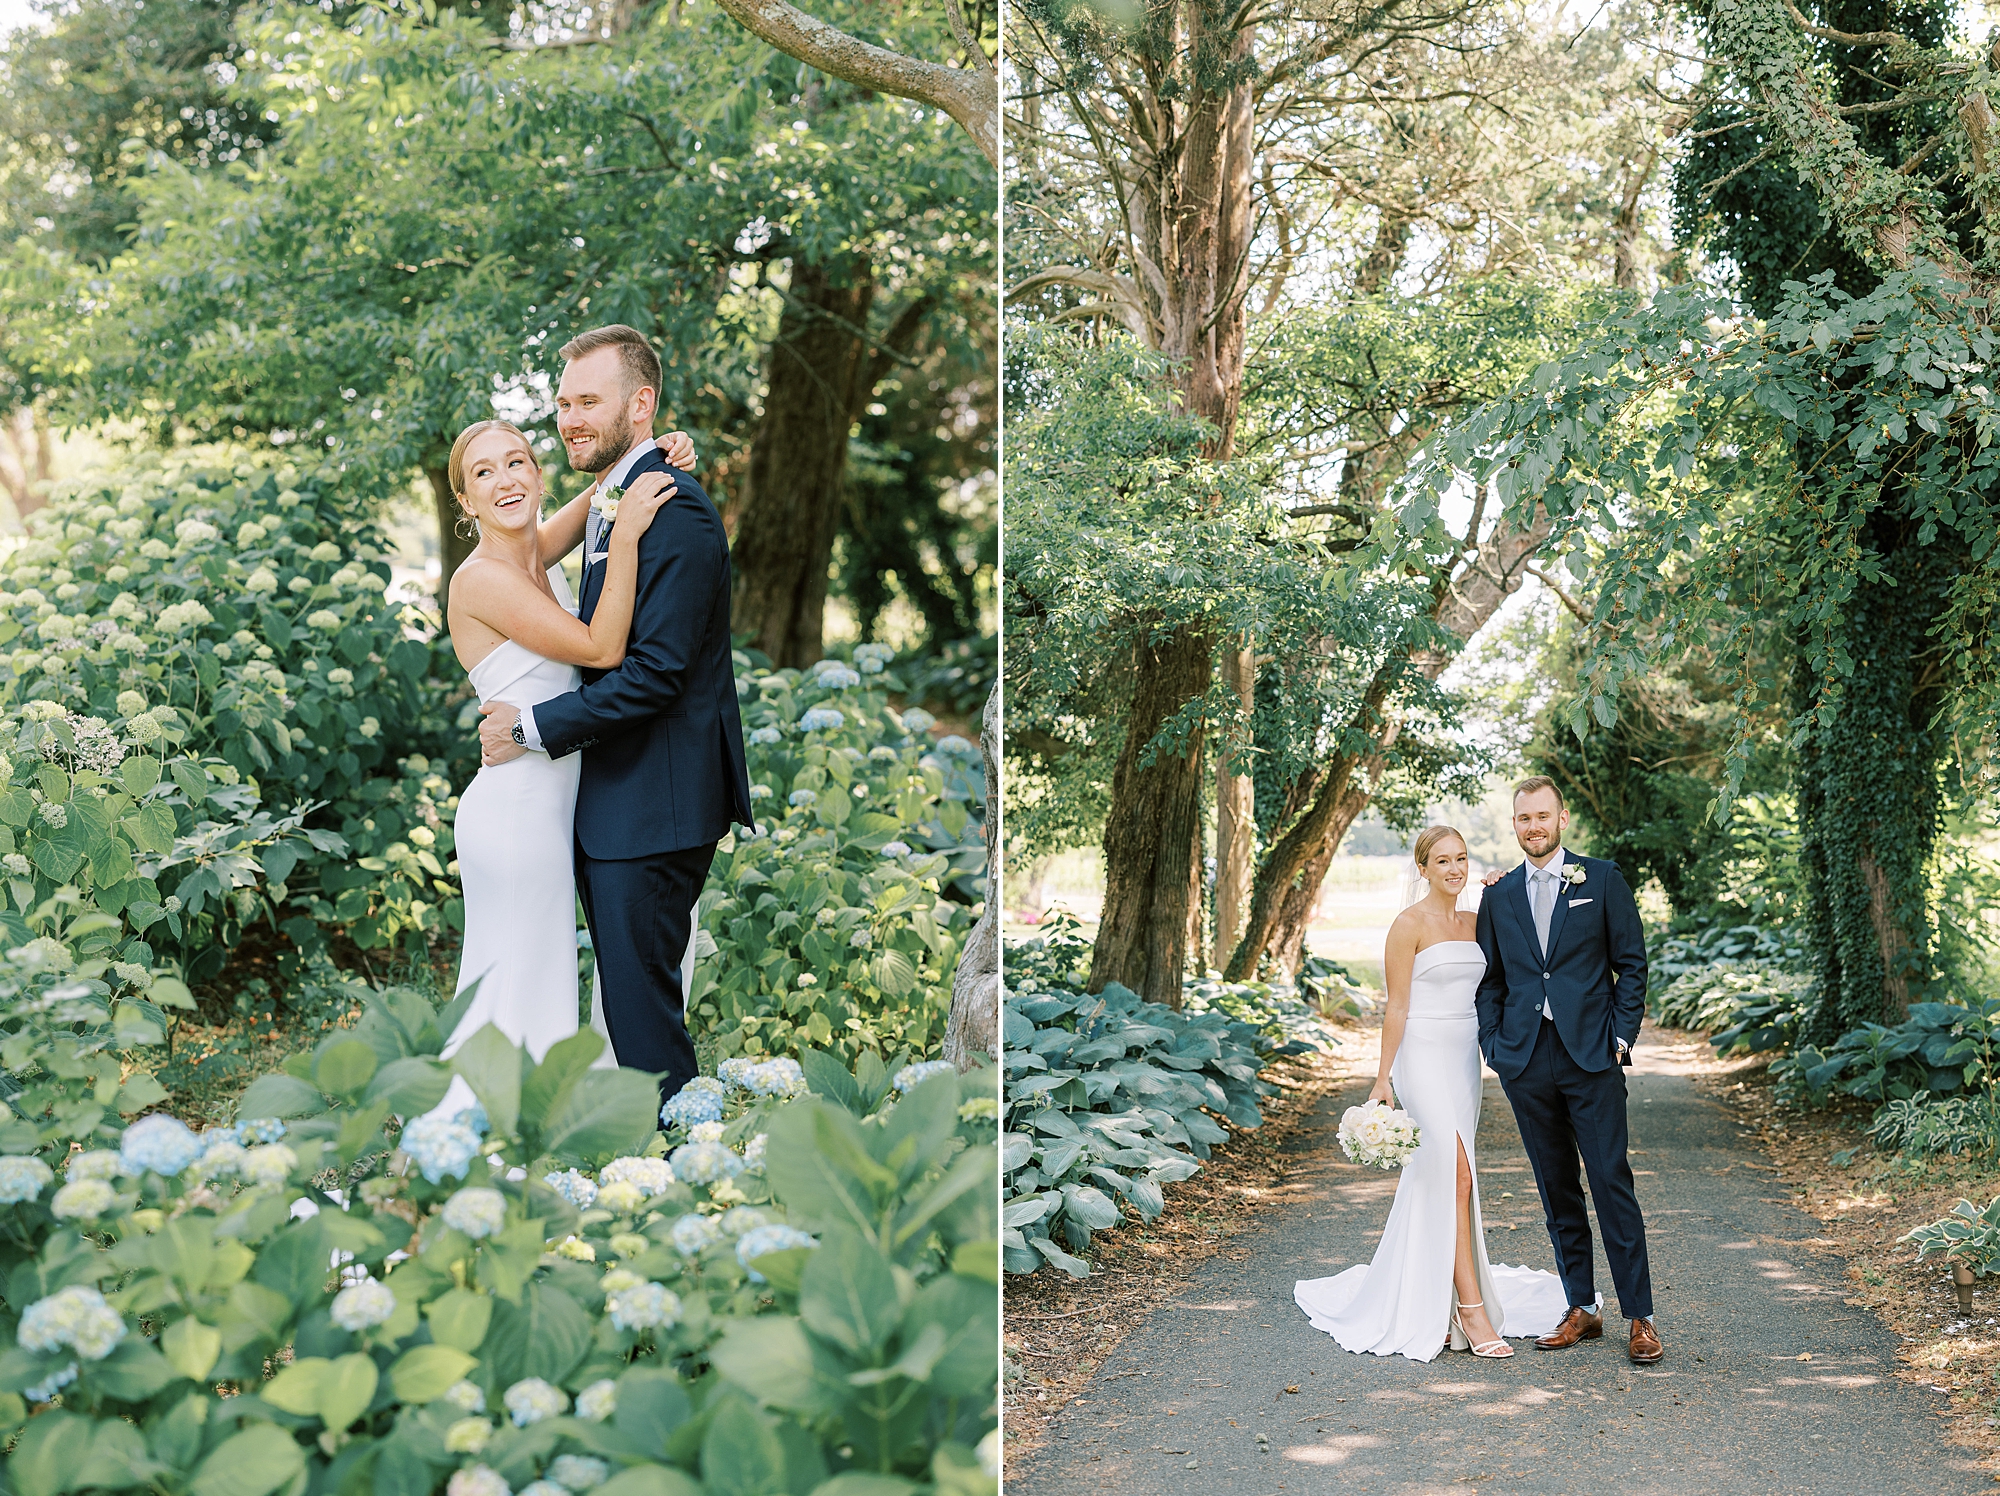 newlyweds hug and pose on walkway inside garden at Willow Creek Winery